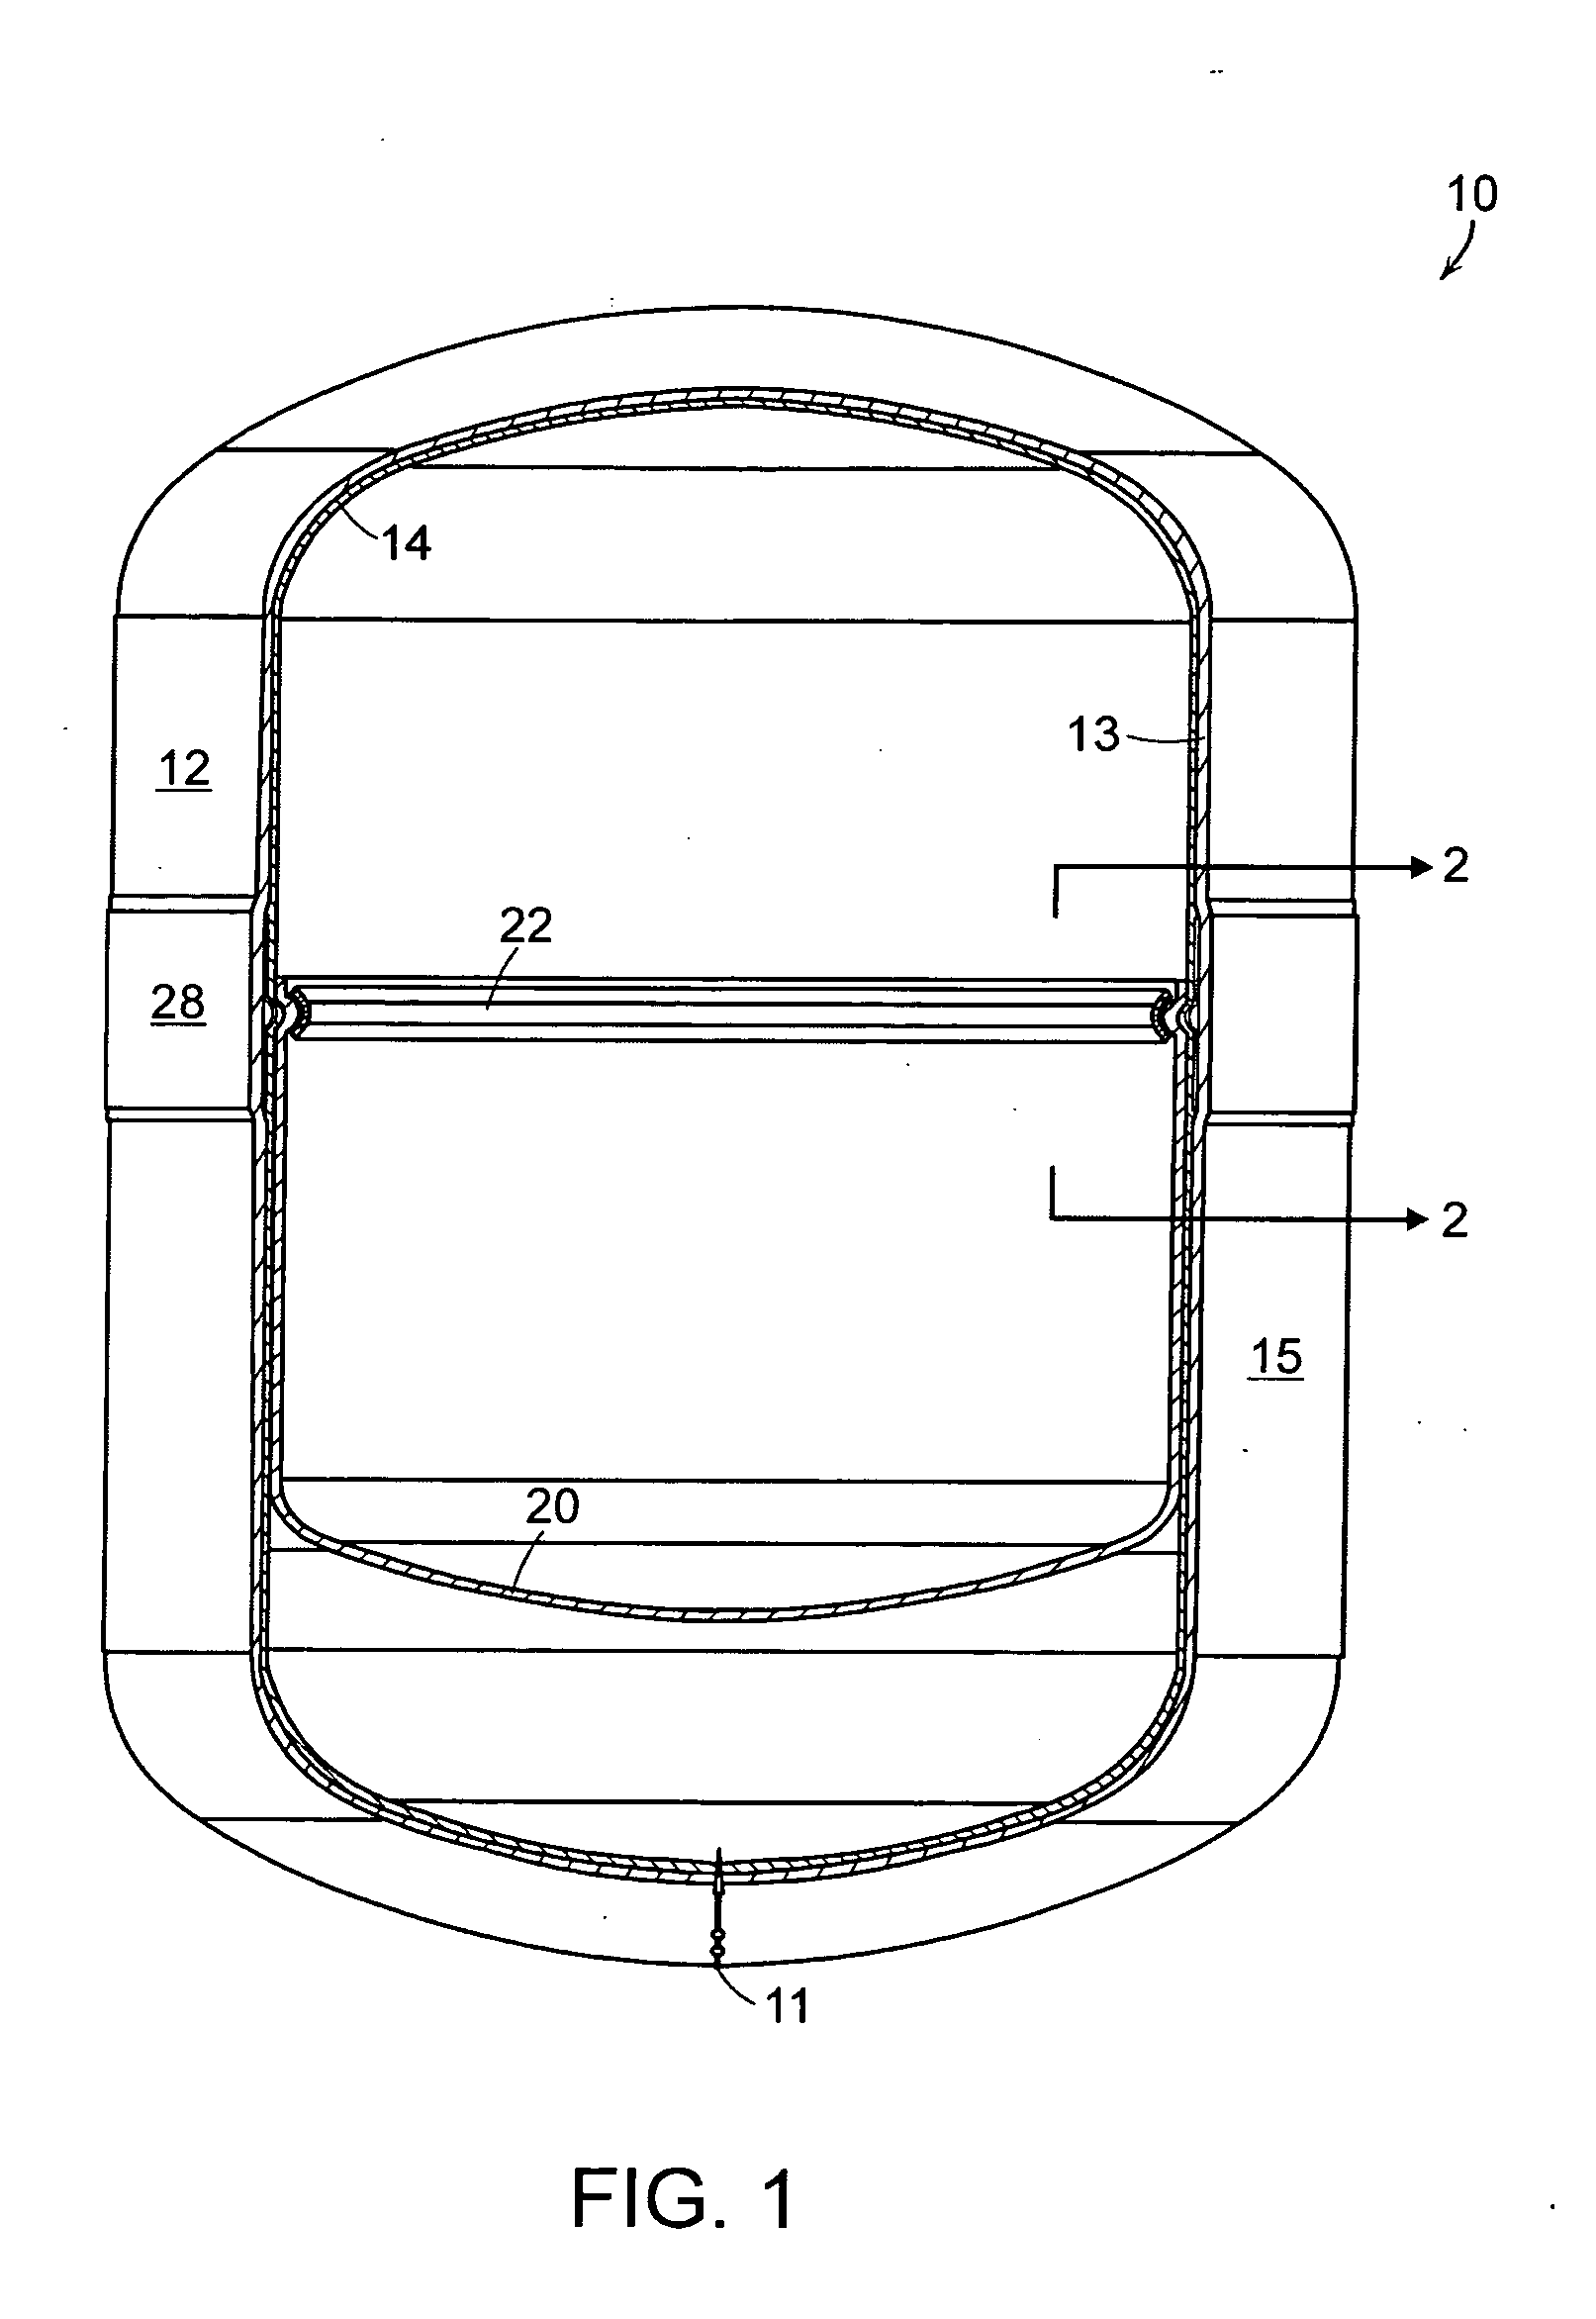 Non-metallic expansion tank with internal diaphragm and clamping device for same